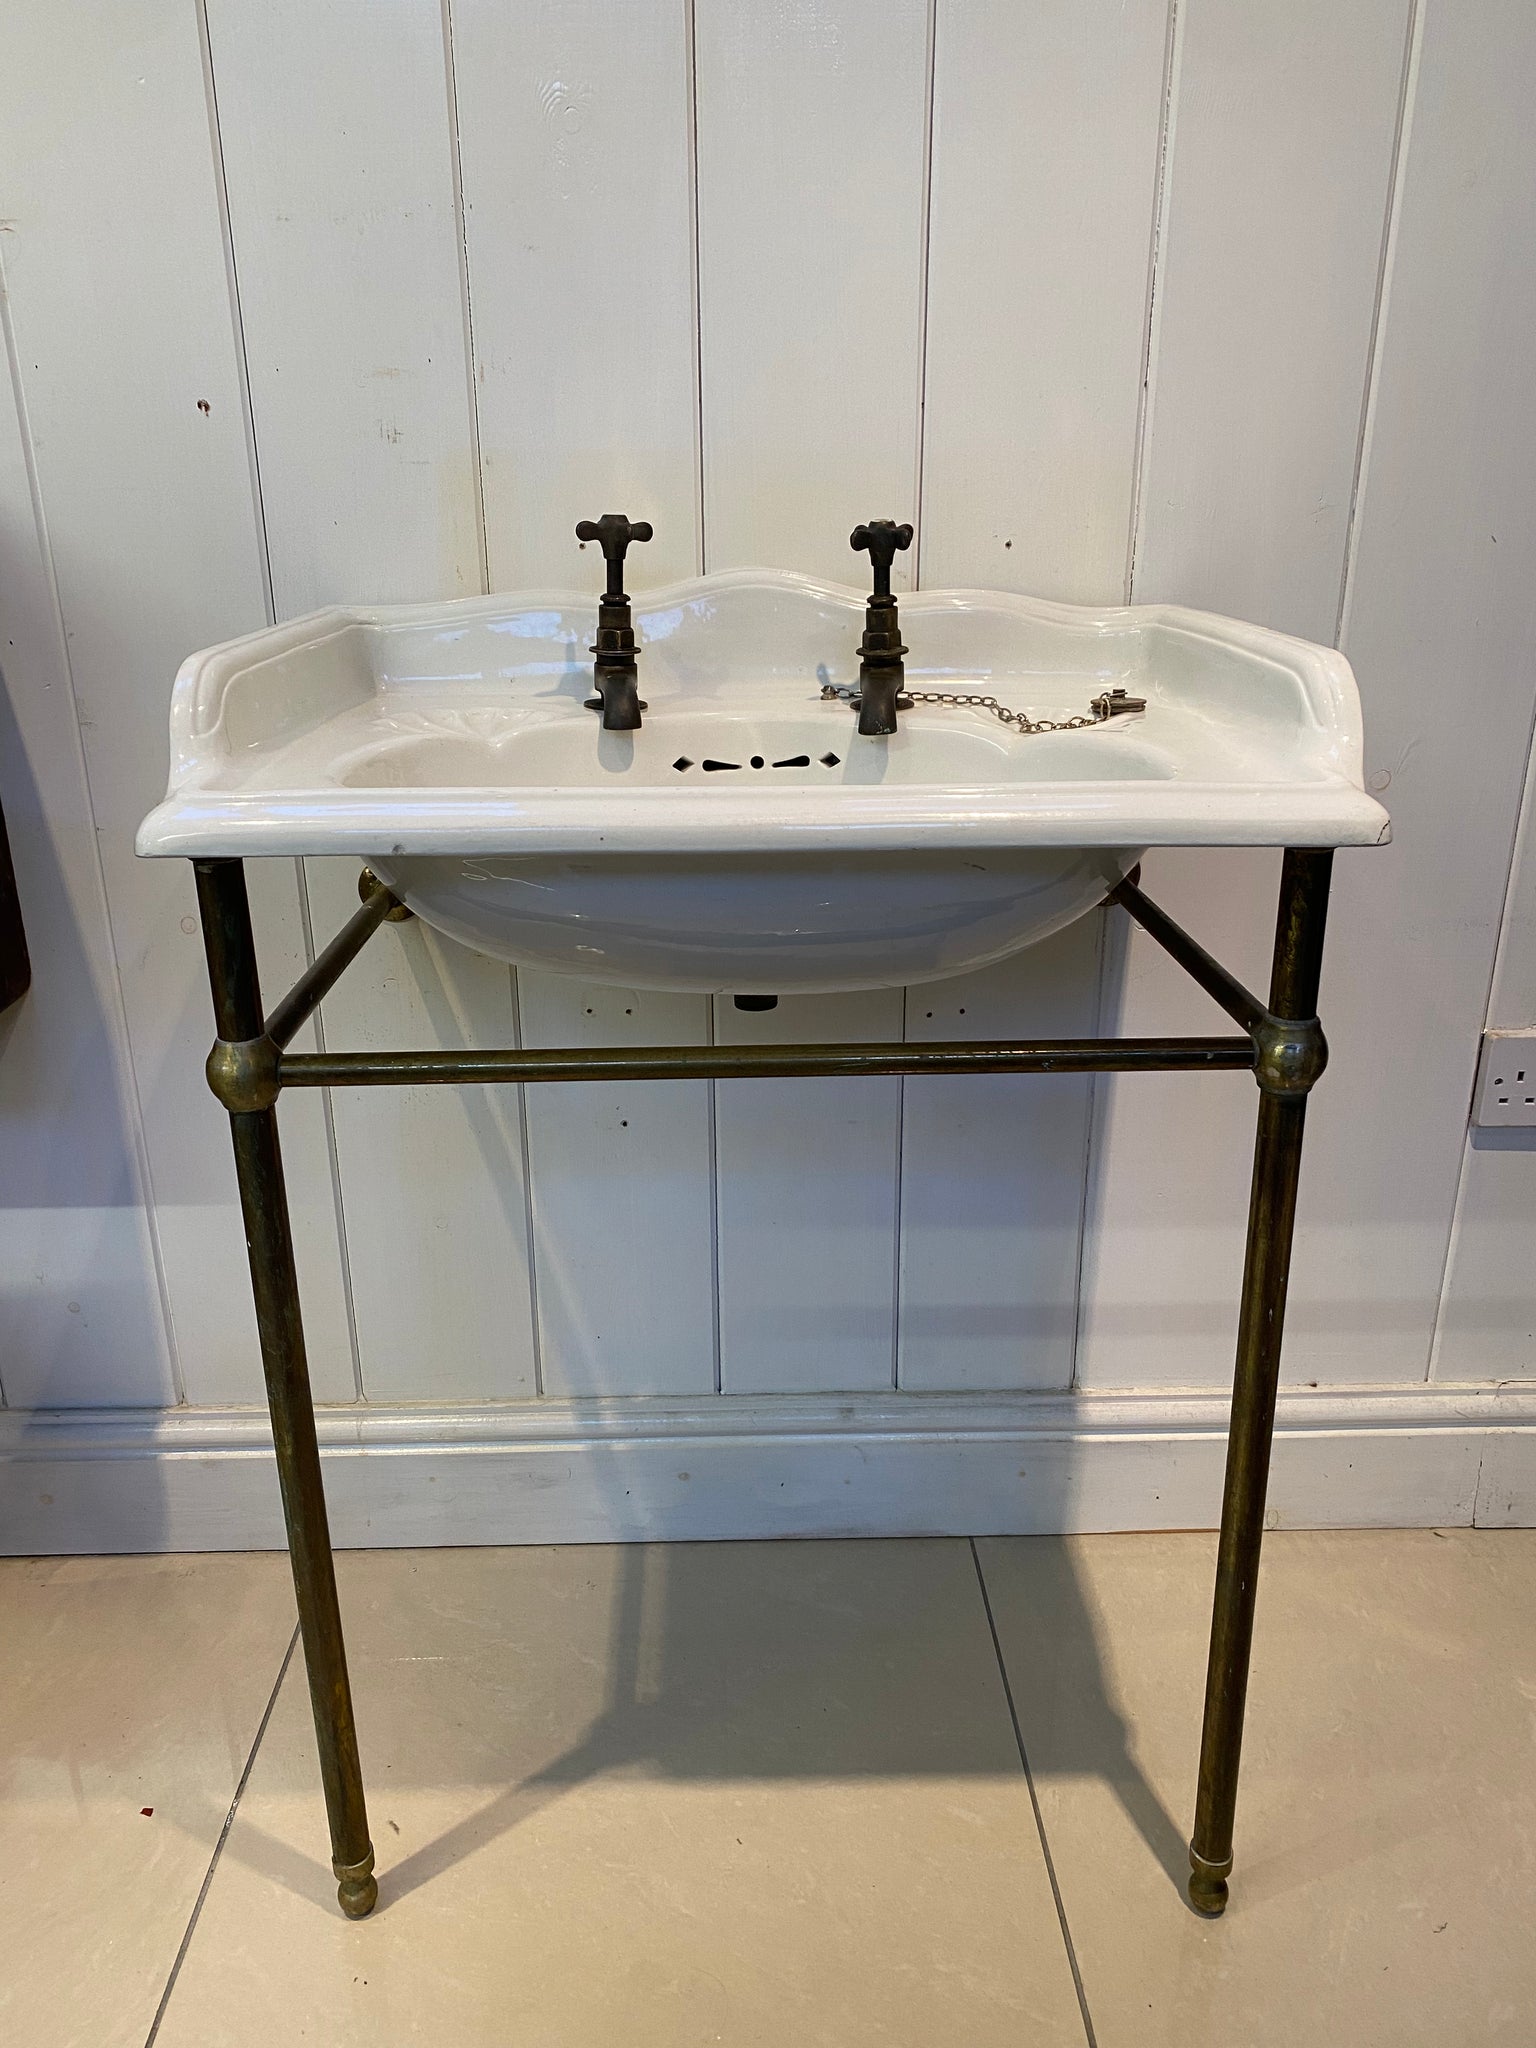 Victorian Doulton Basin on Brass Stand C.1880